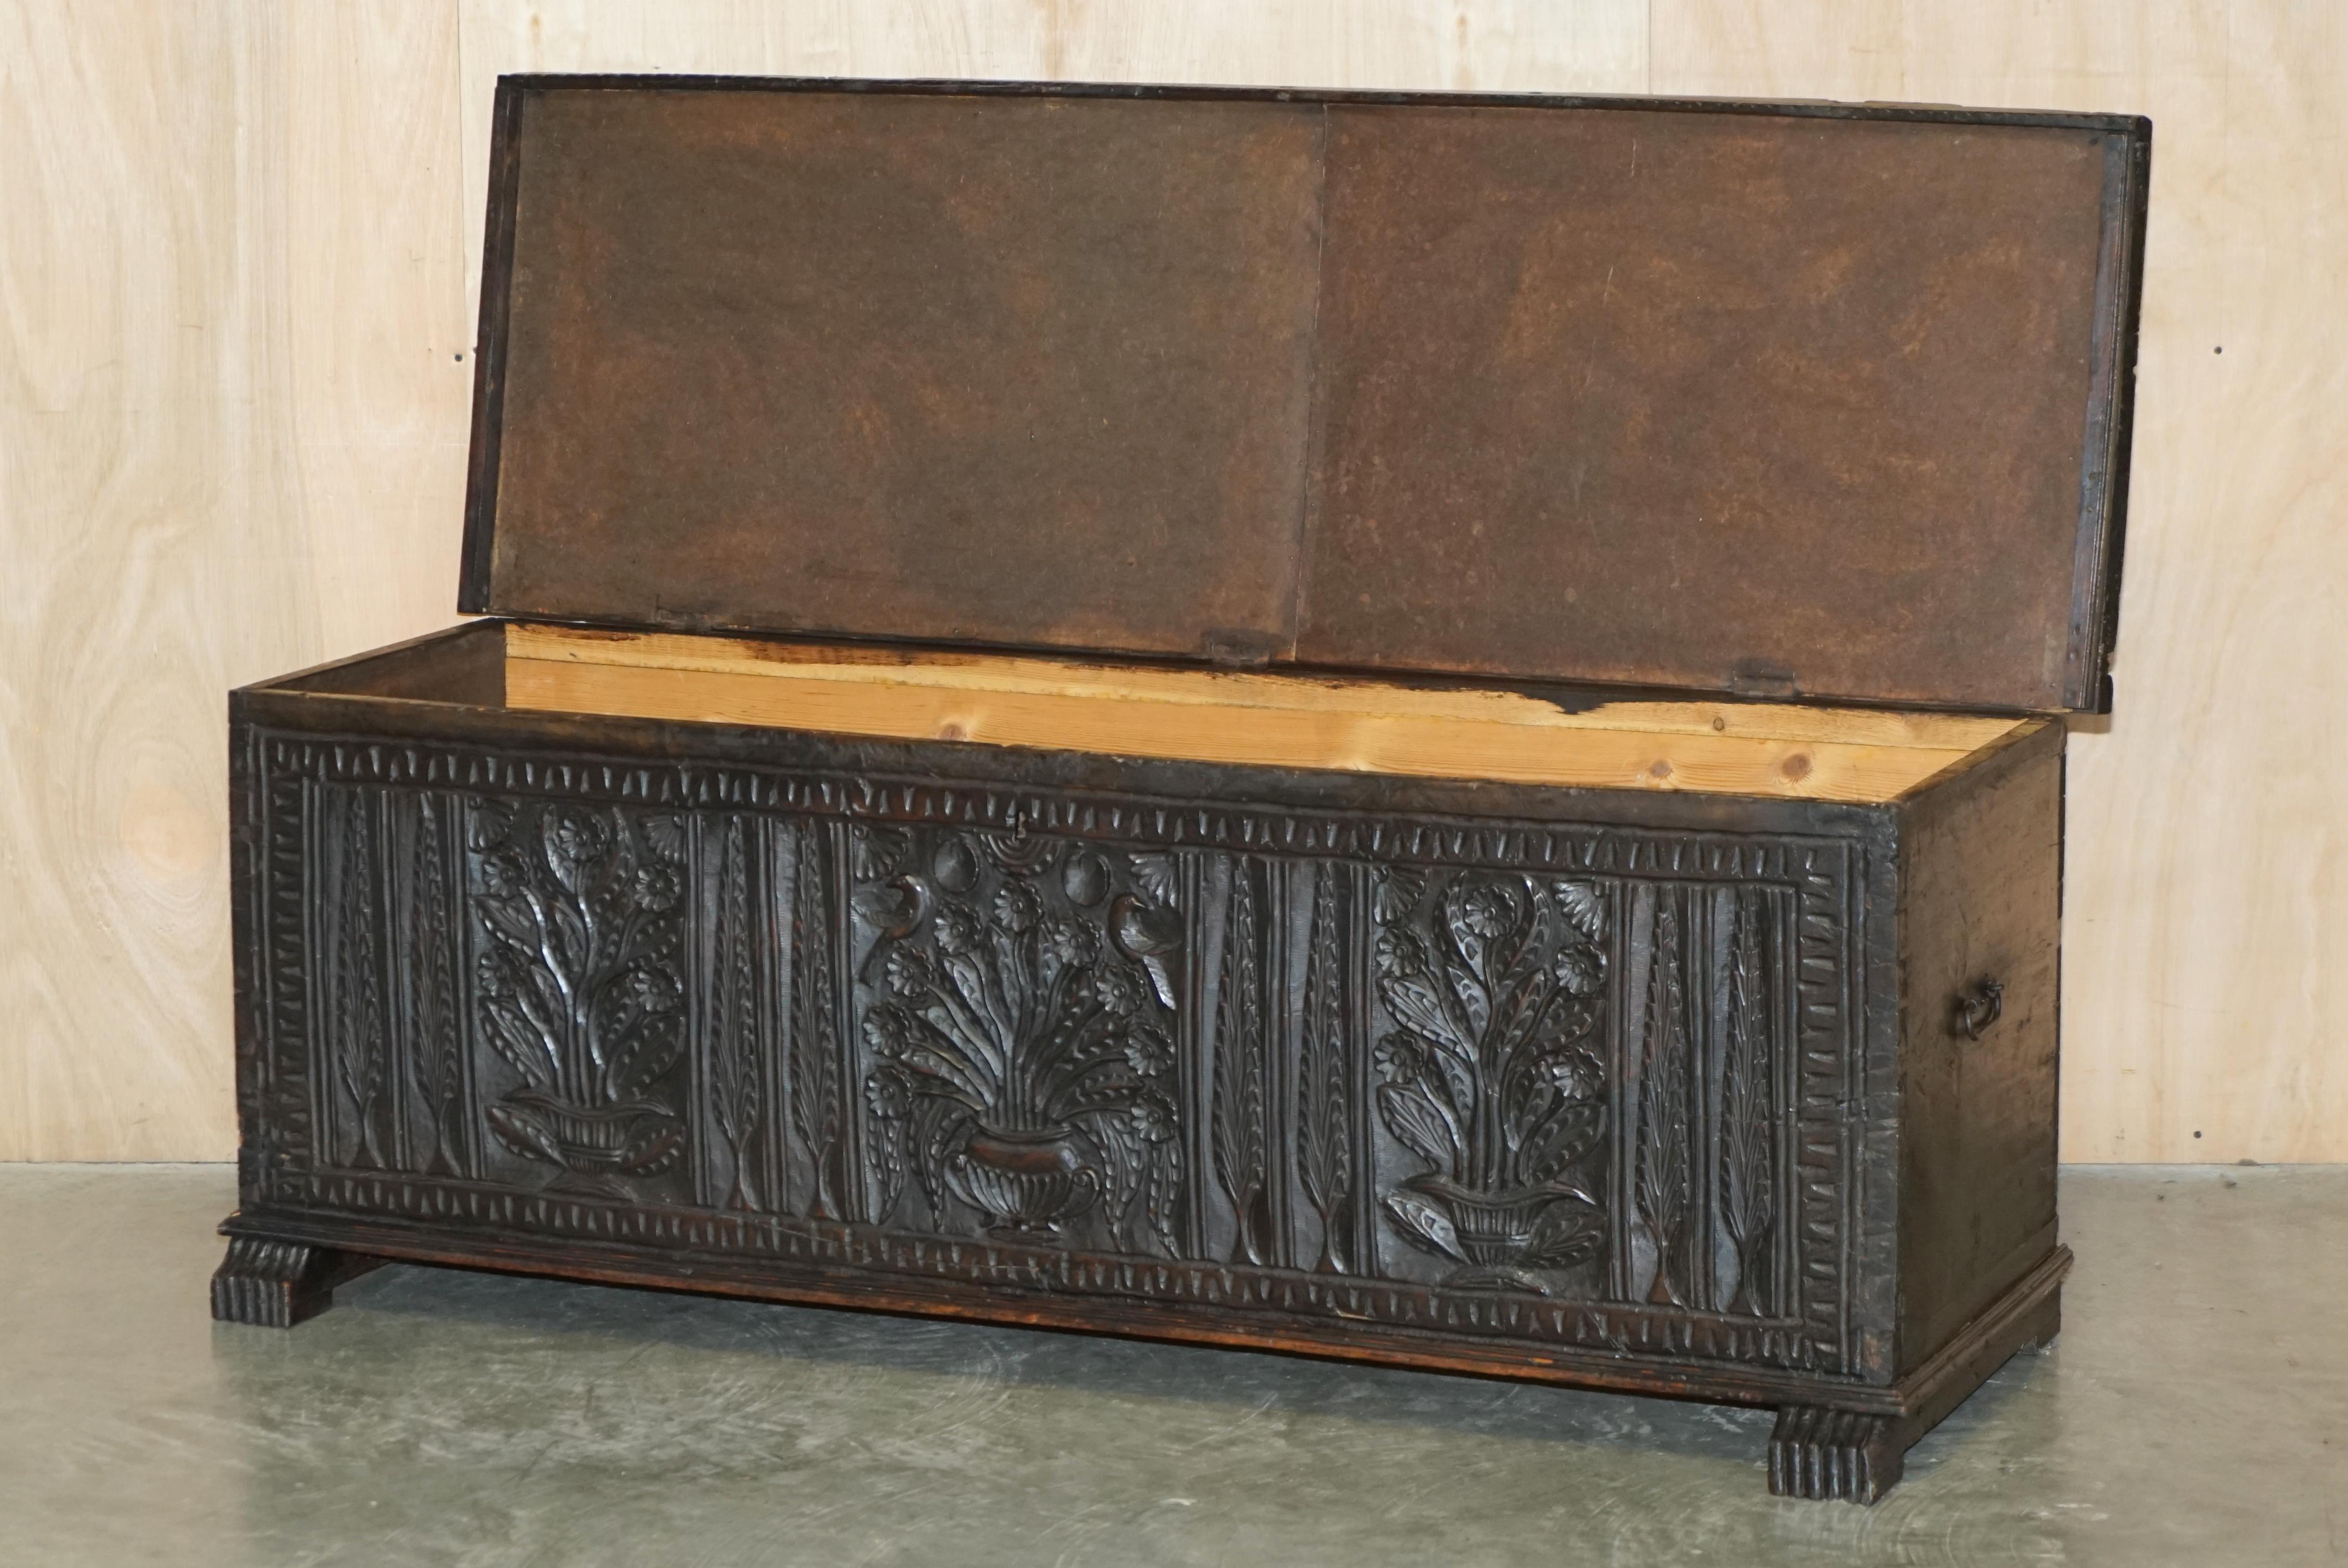 ANTIQUE 19TH CENTURY JACOBEAN REViVAL HAND CARVED TRUNK CHEST OTTOMAN For Sale 11